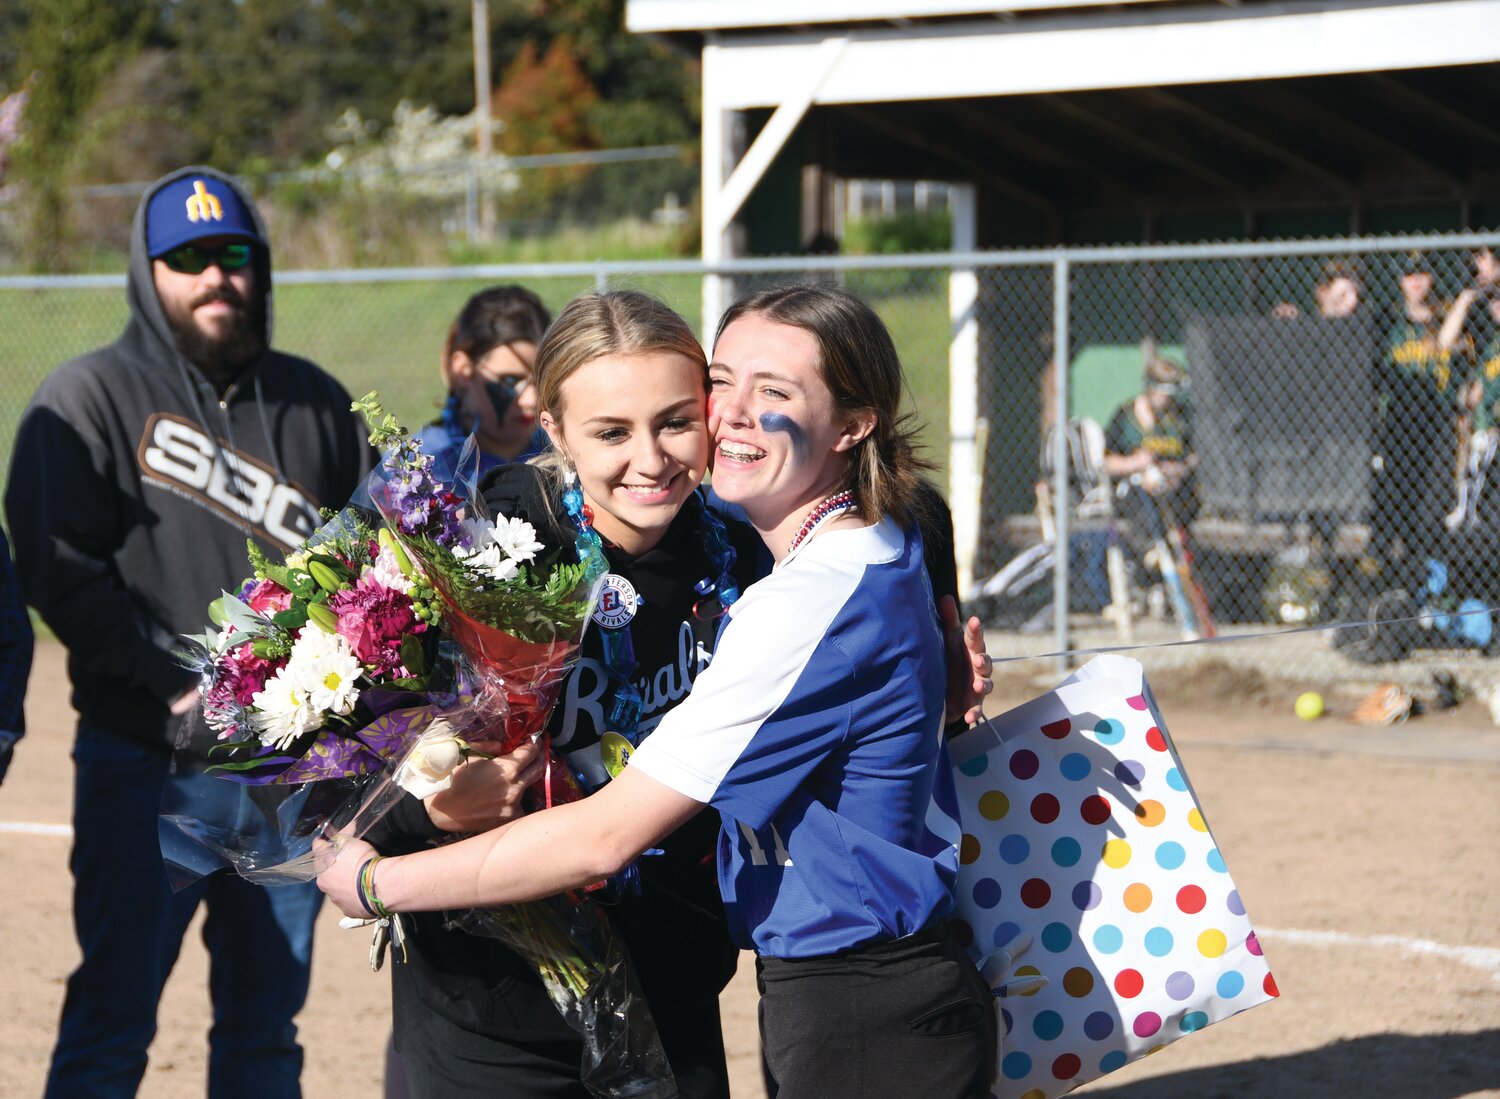 In between the double header games and during the senior celebration ceremony, senior Macy Aumock shares a hug with Rylee Spainhower-Oas before receiving her flowers.